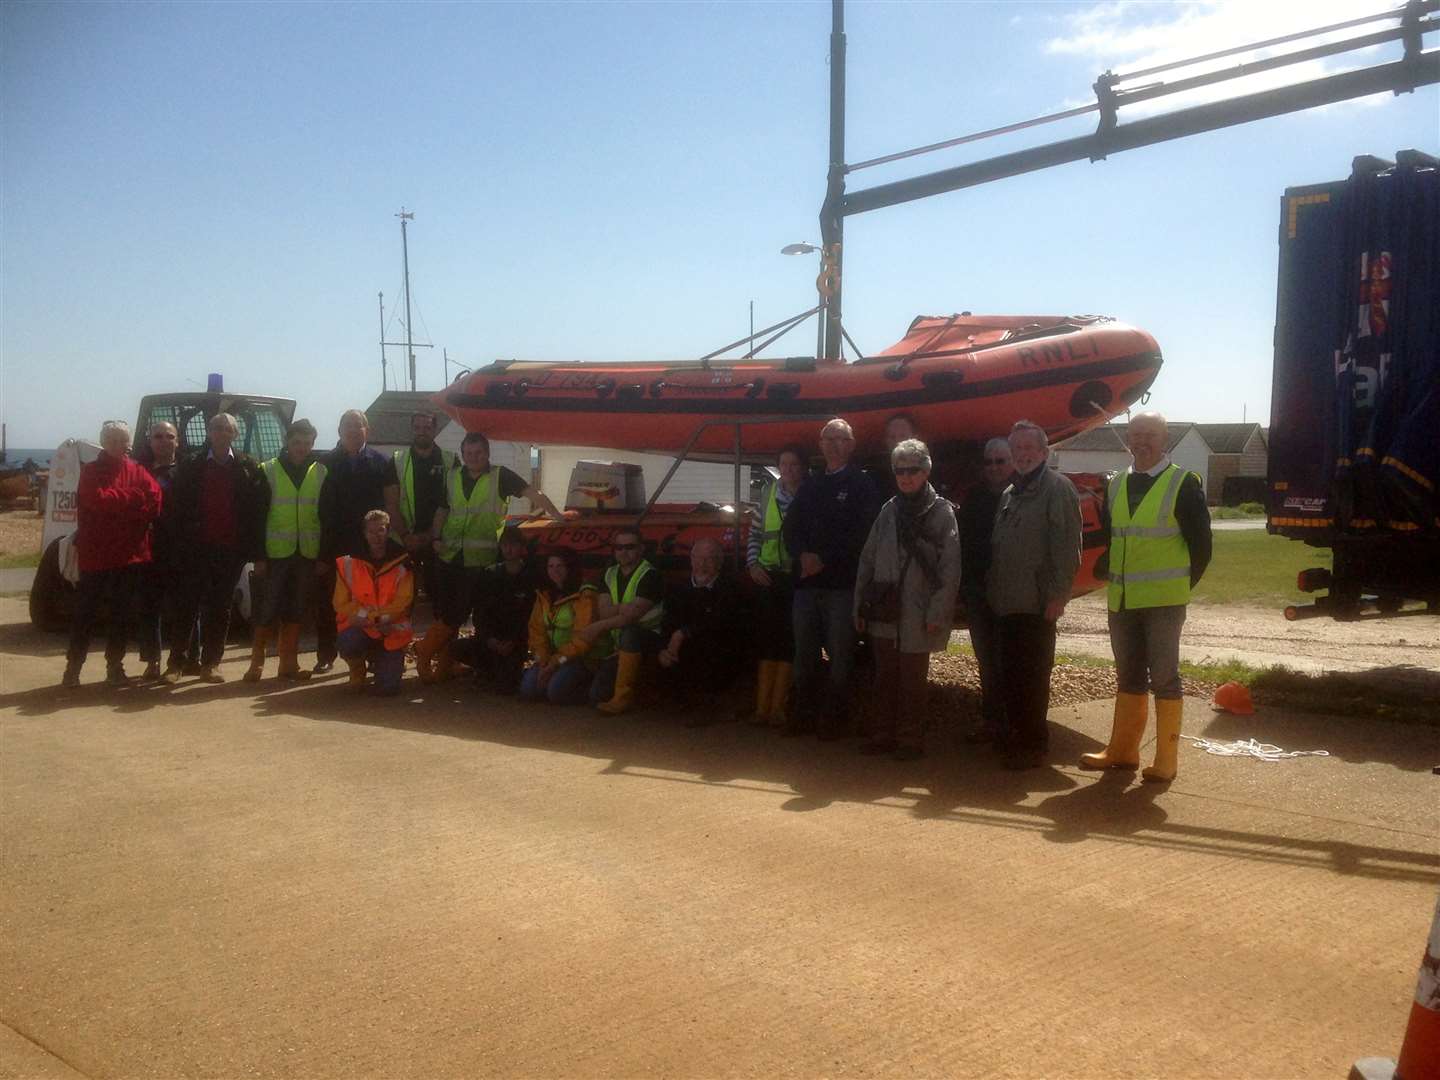 Walmer Lifeboat crew are proud to receive the new lifeboat Duggie Rodbard II which was donated from Mr Rodbard's wife, Val